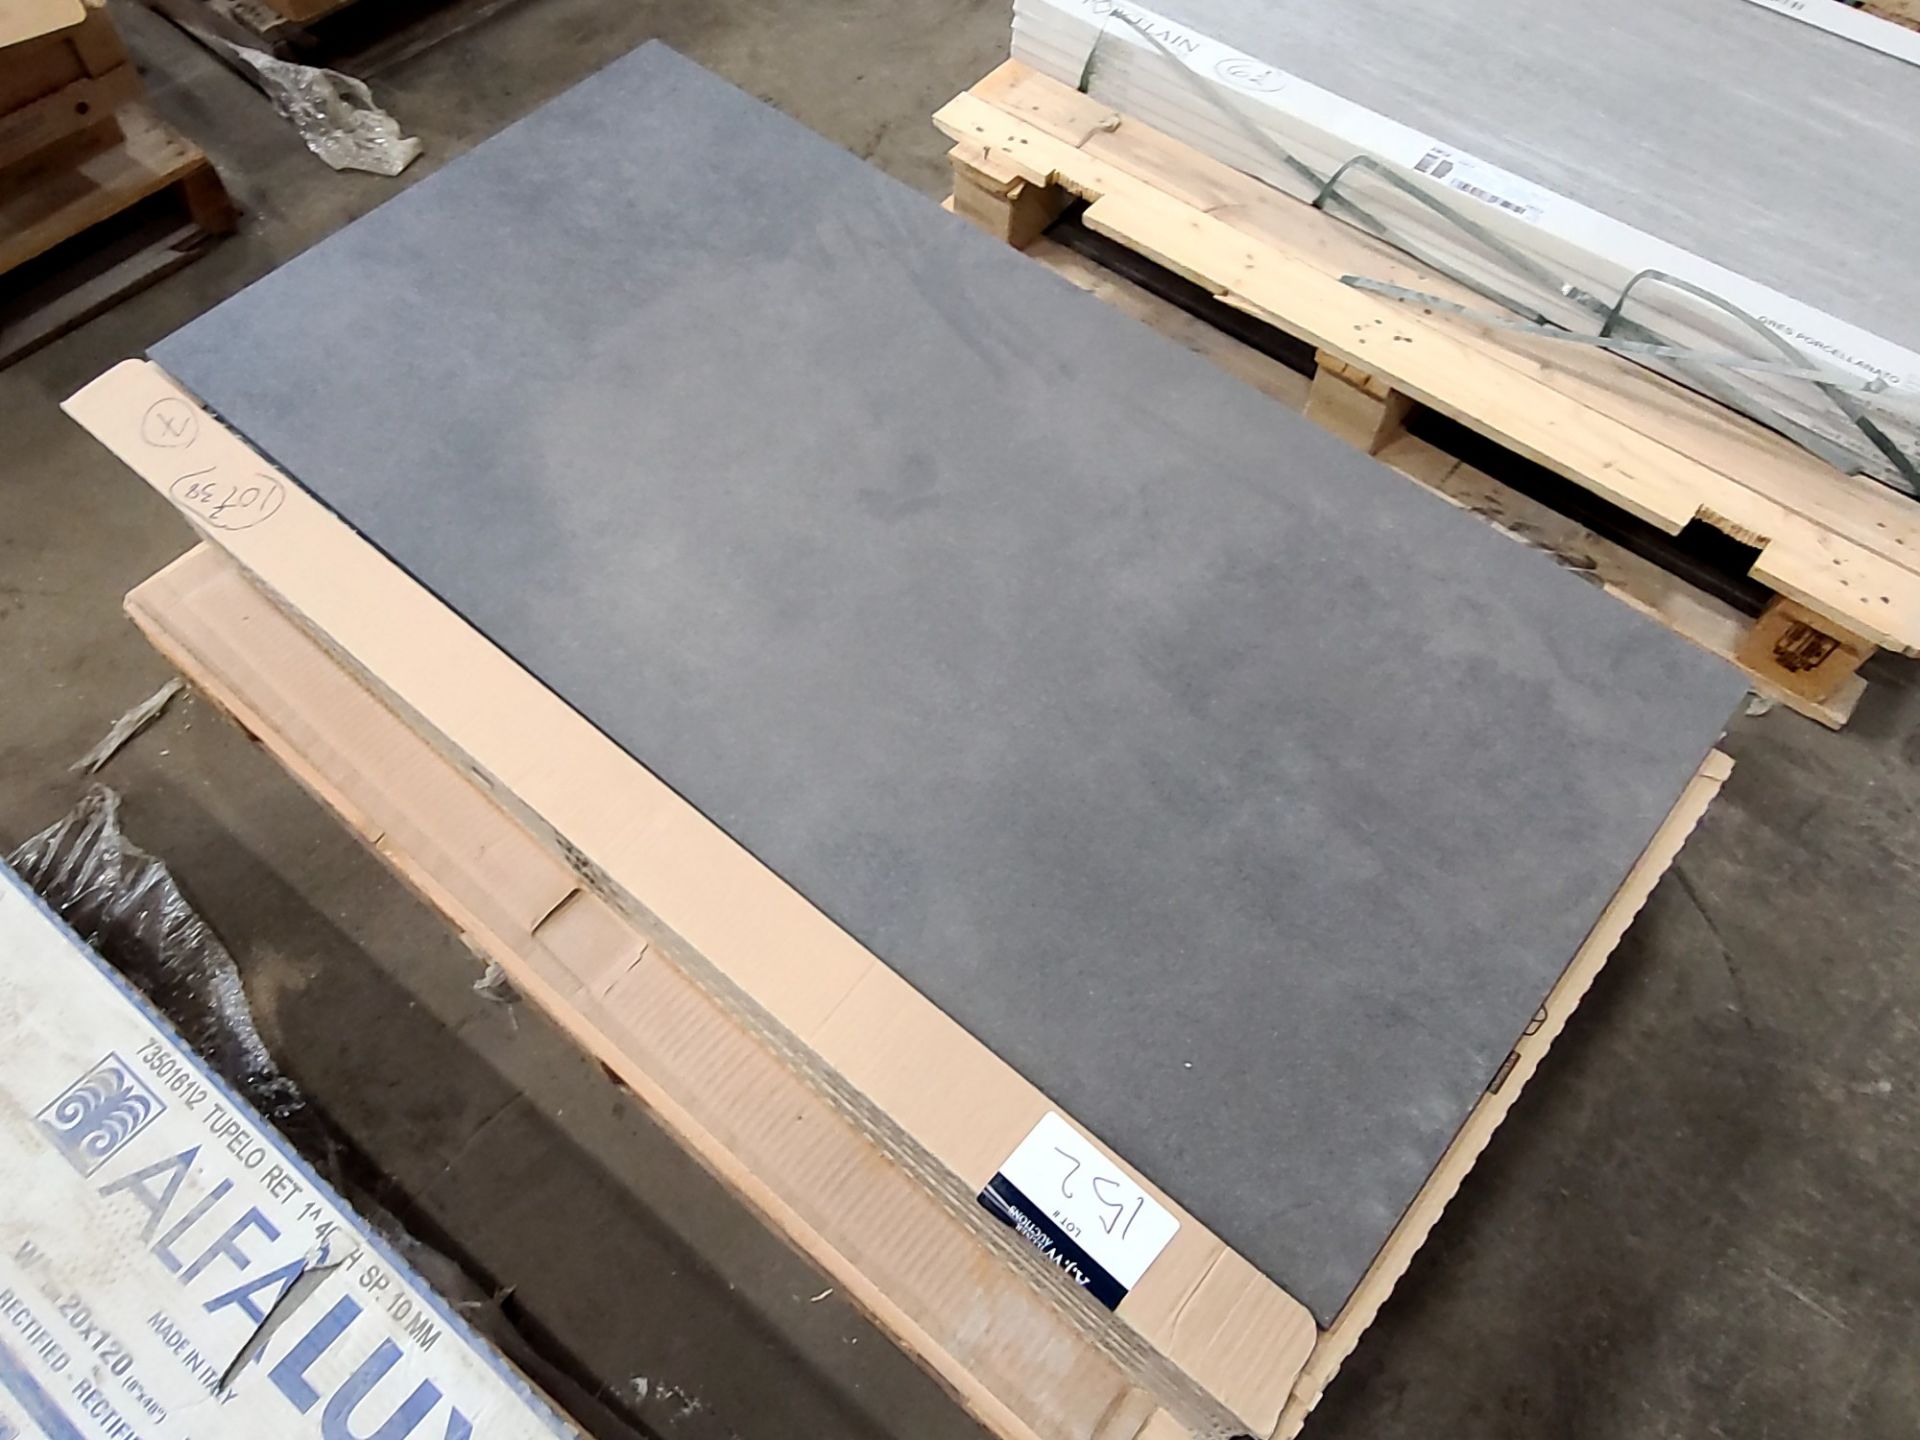 [sq ft] FMG Industrial Slabs 23 1/2" x 47" Abstract Grey - Image 2 of 2